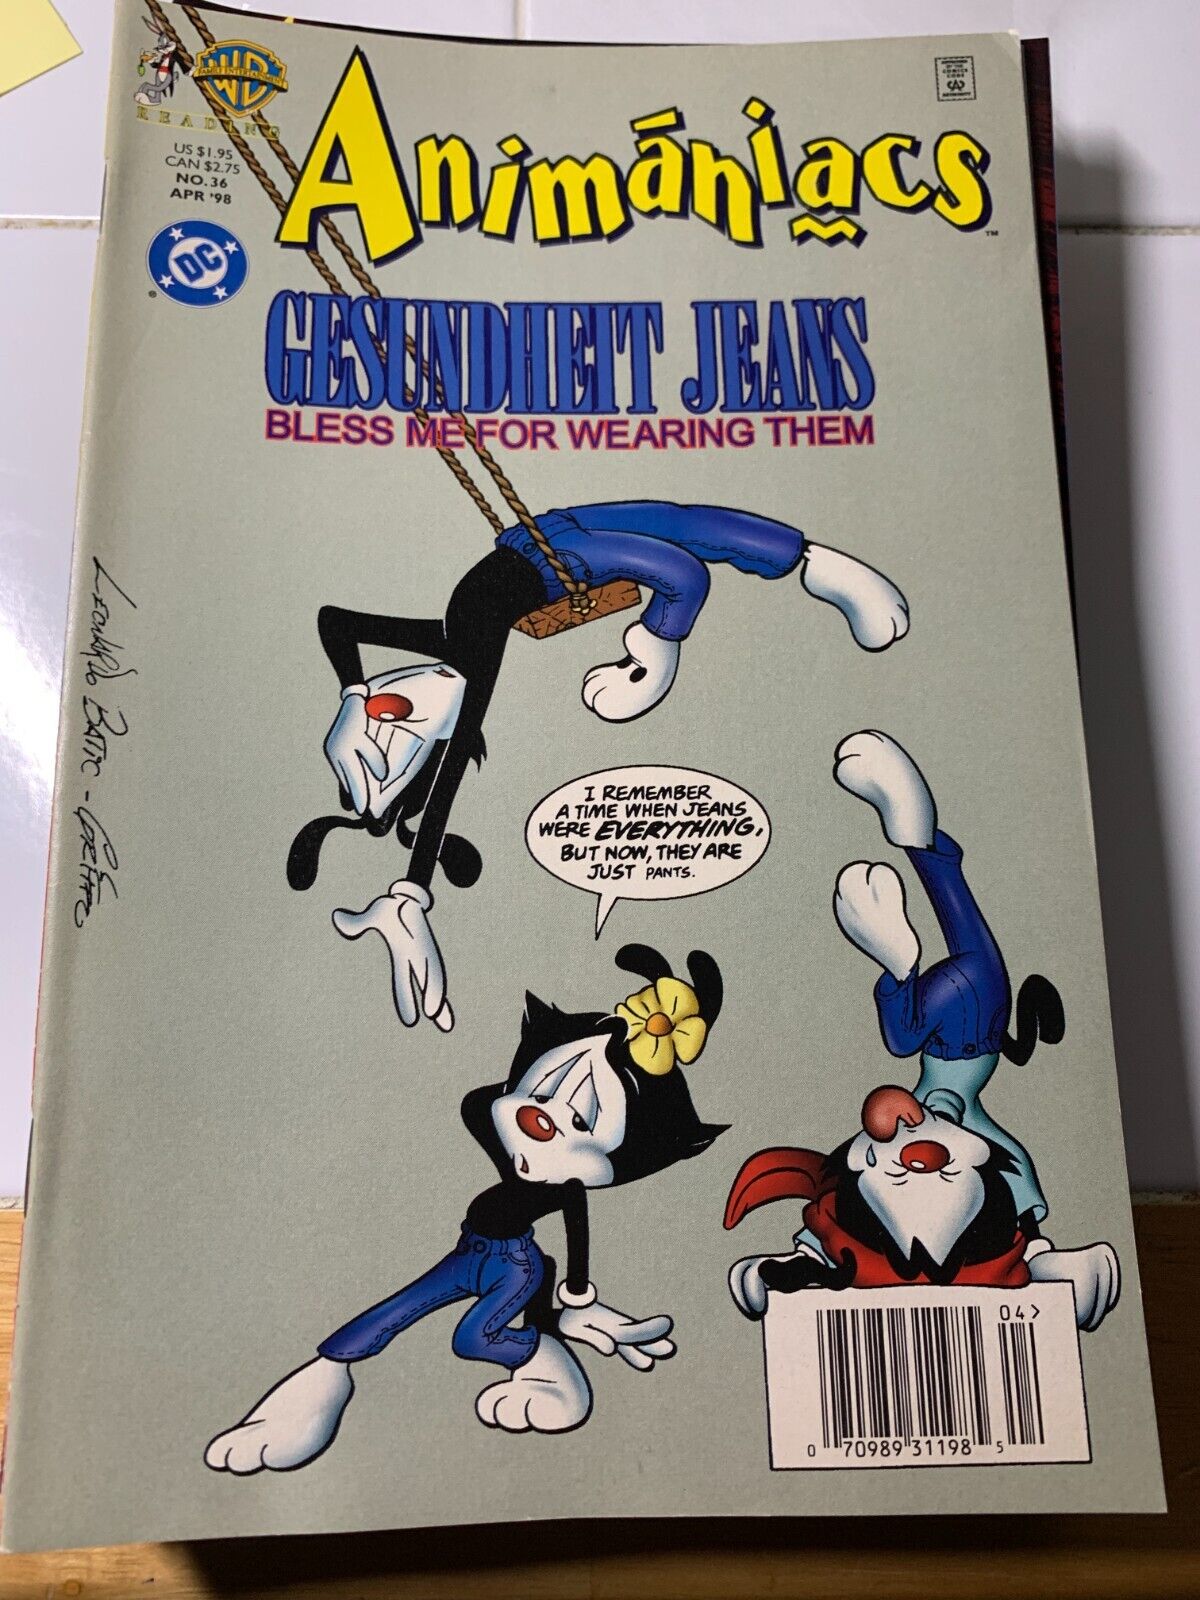 1998 DC Comics Animaniacs #36 Gesundheit Jeans Bless me for wearing them Cartoon